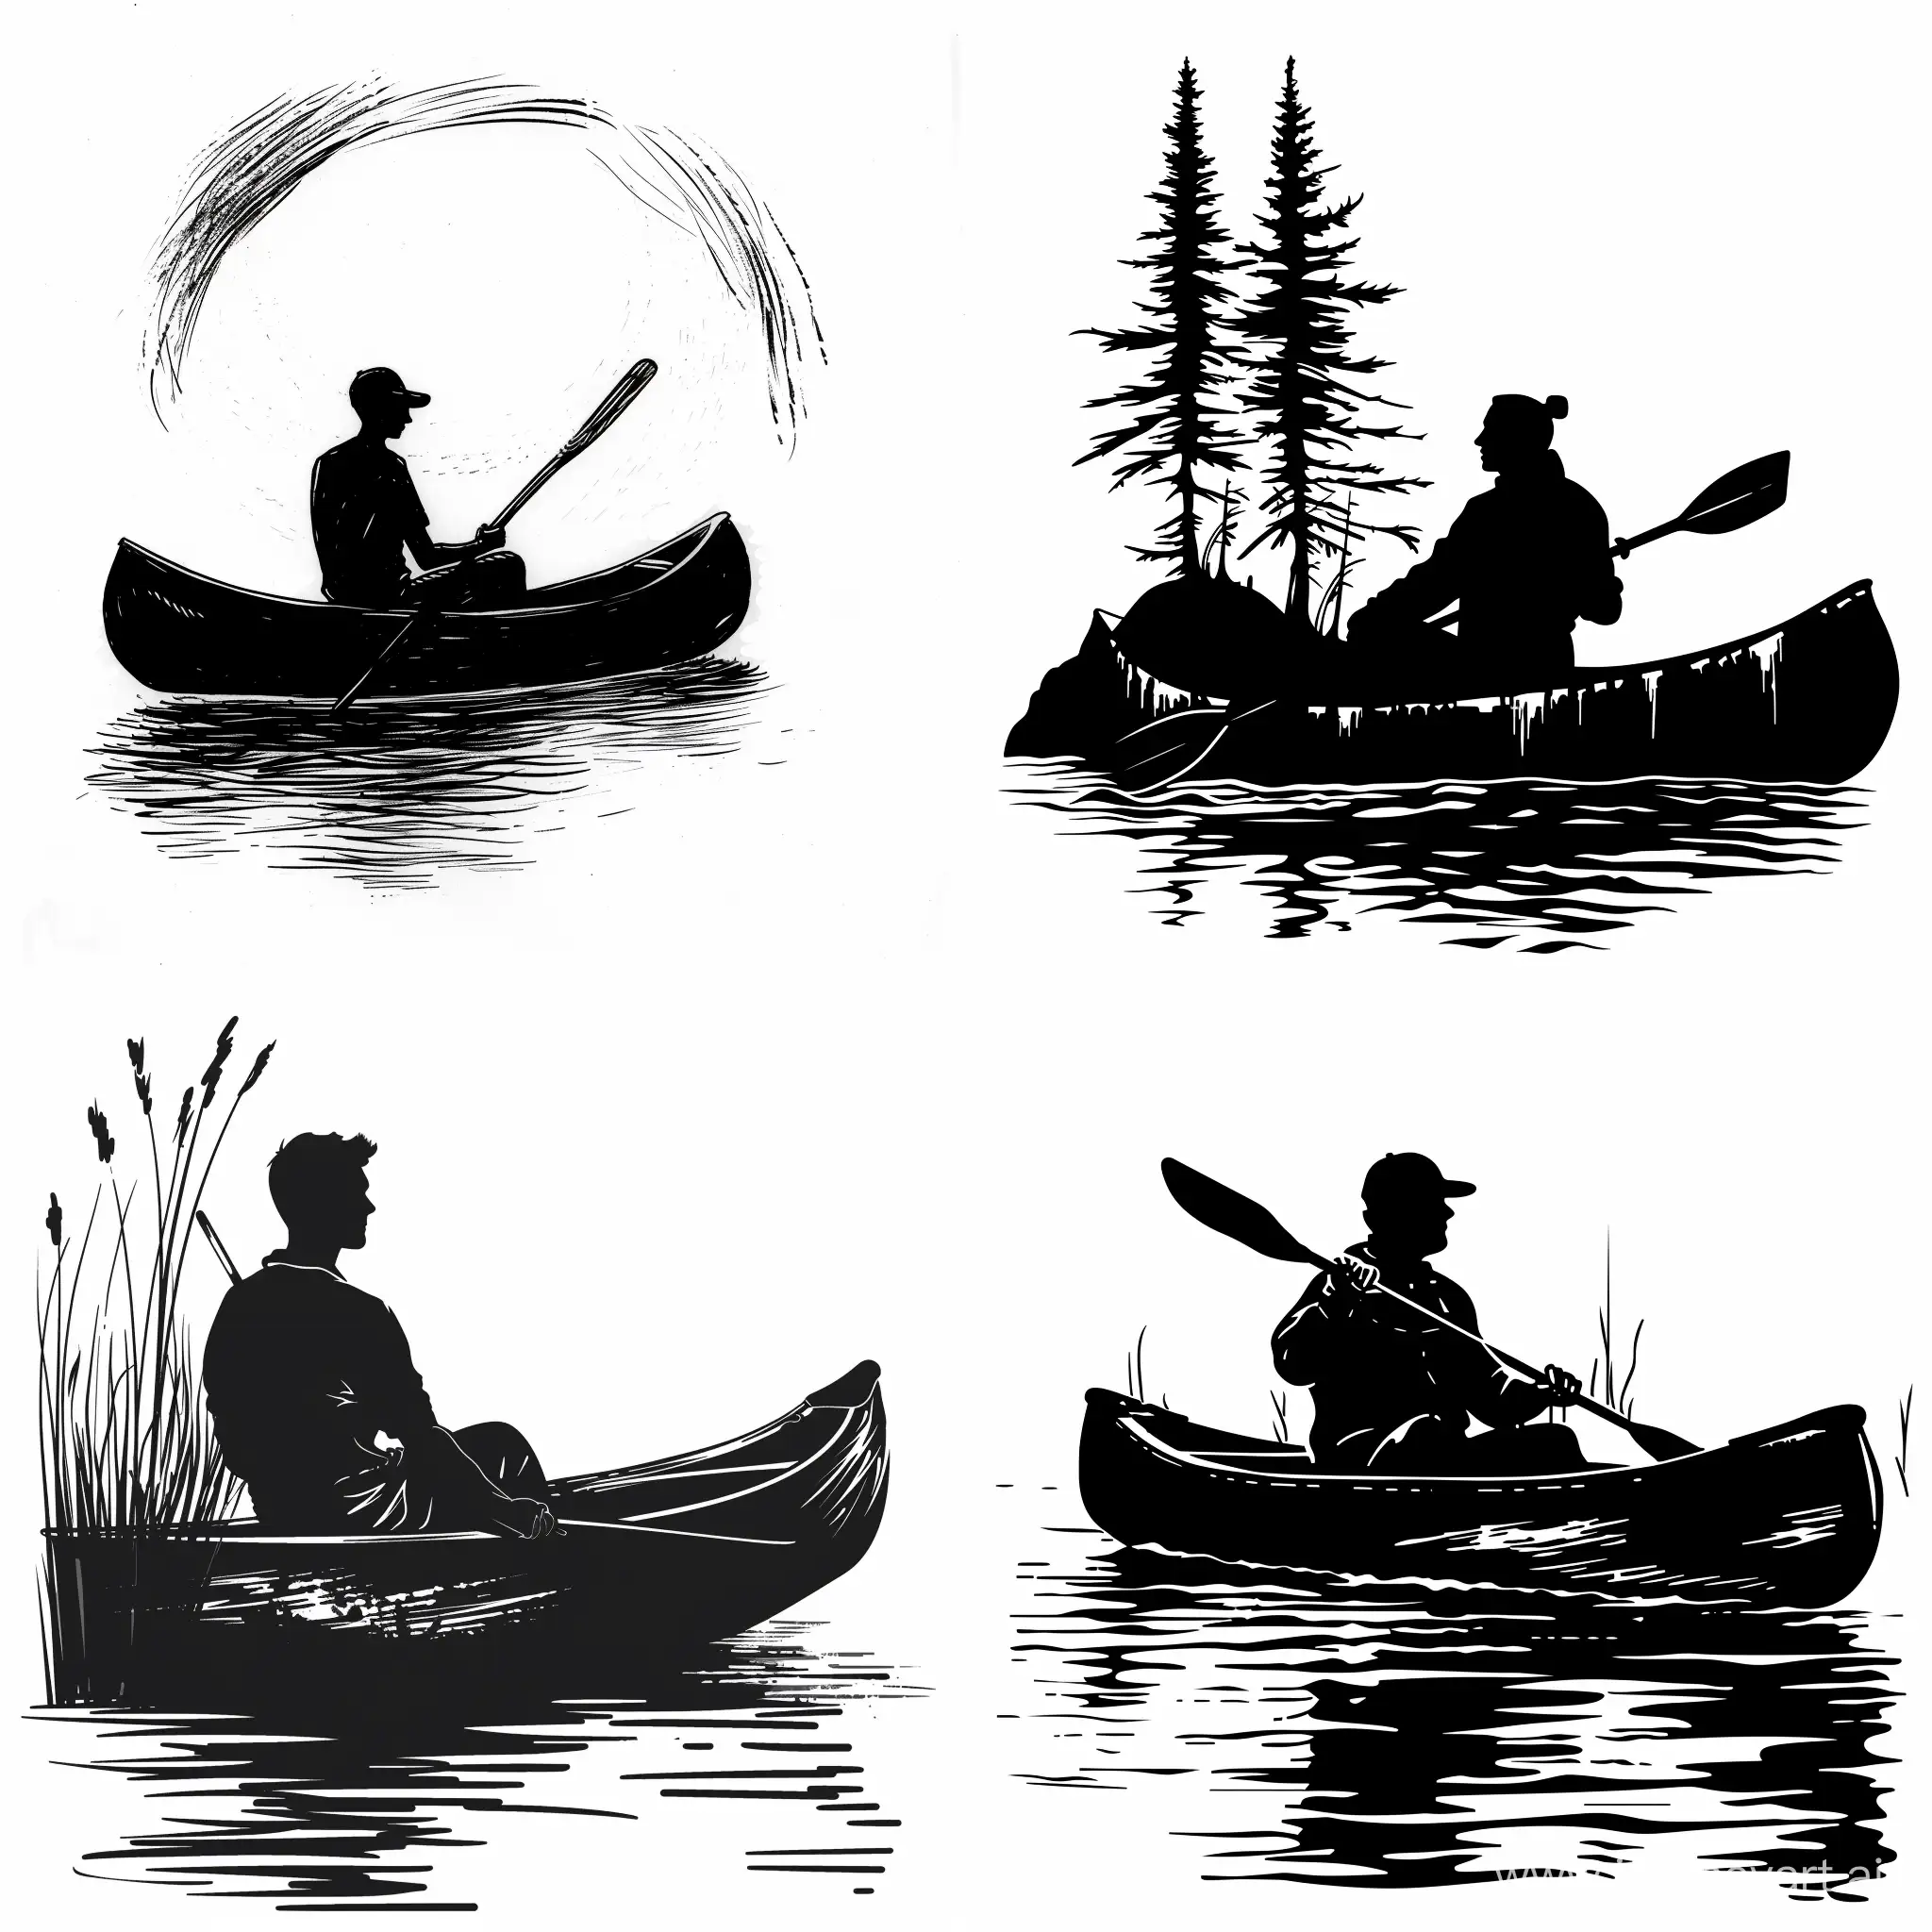 Silhouette-Illustration-of-Man-Canoeing-in-Black-and-White